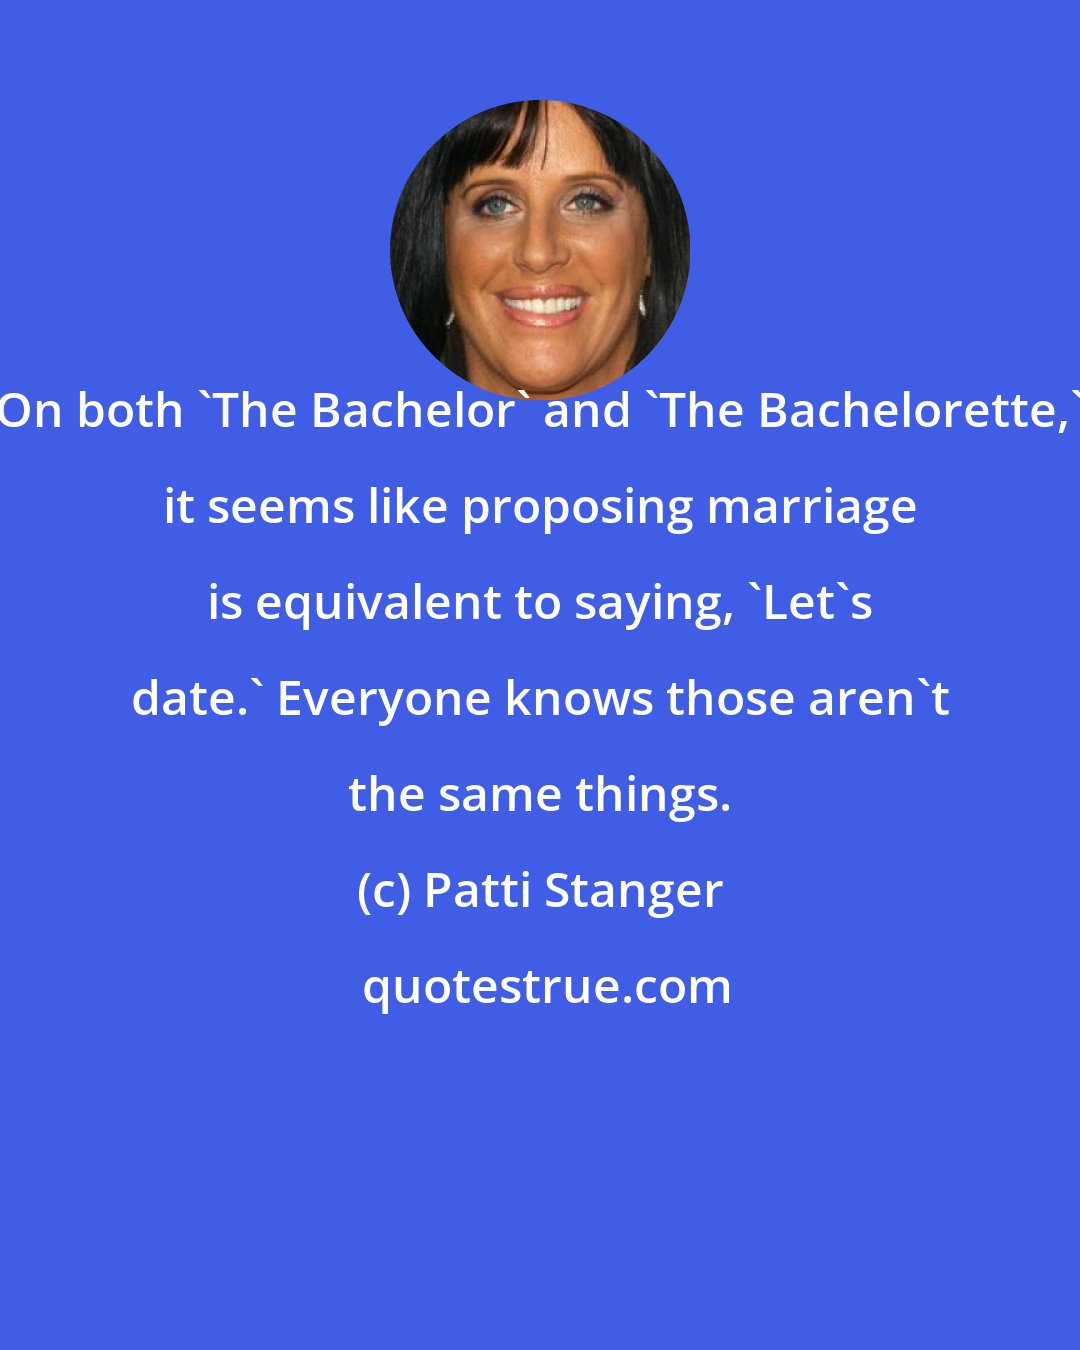 Patti Stanger: On both 'The Bachelor' and 'The Bachelorette,' it seems like proposing marriage is equivalent to saying, 'Let's date.' Everyone knows those aren't the same things.